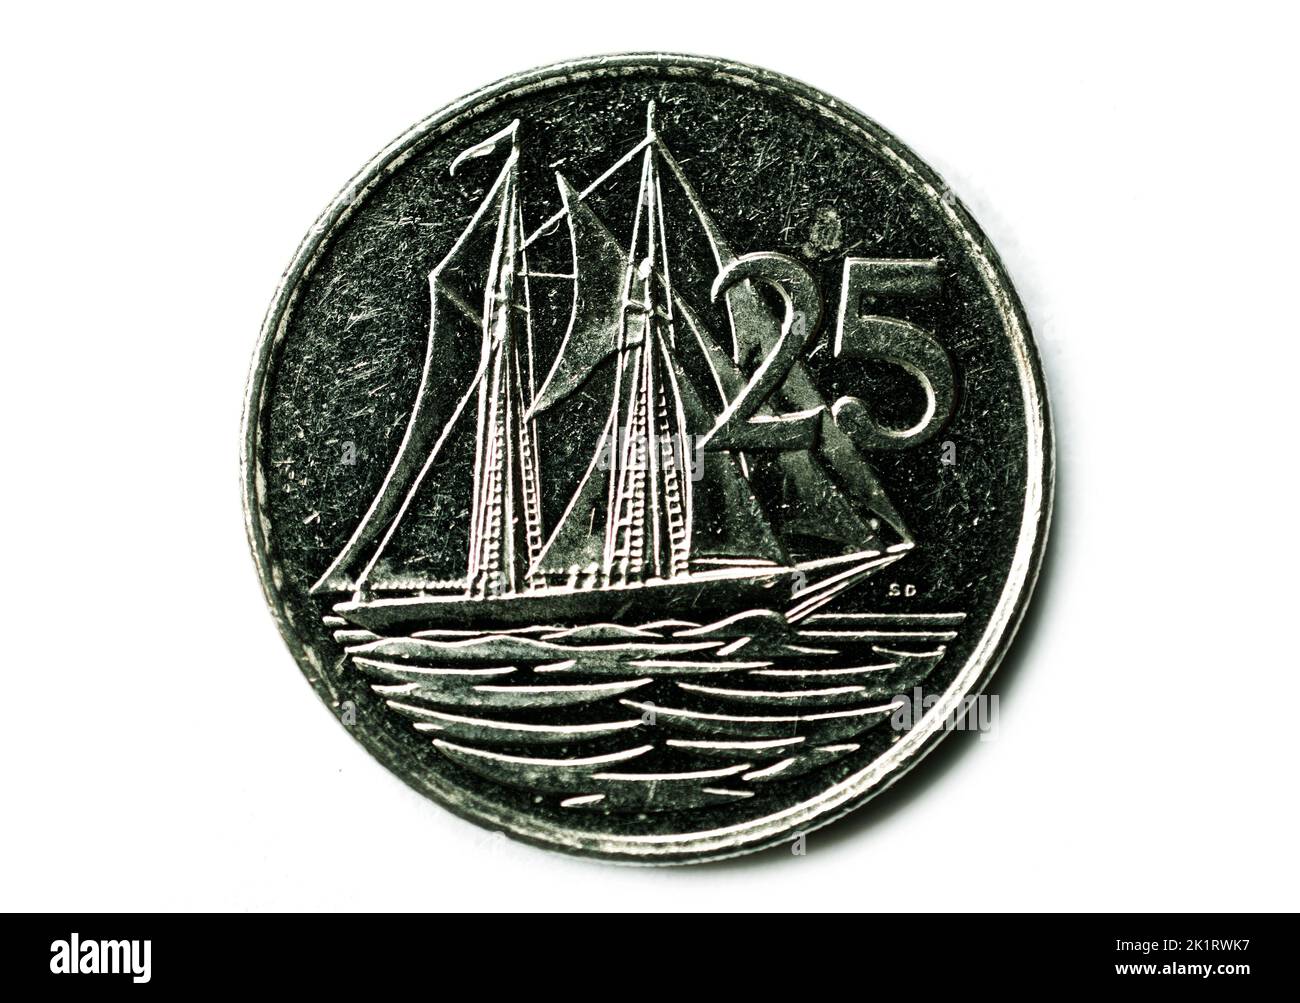 Photo coins Cayman islands,1990, 25 Cents Stock Photo